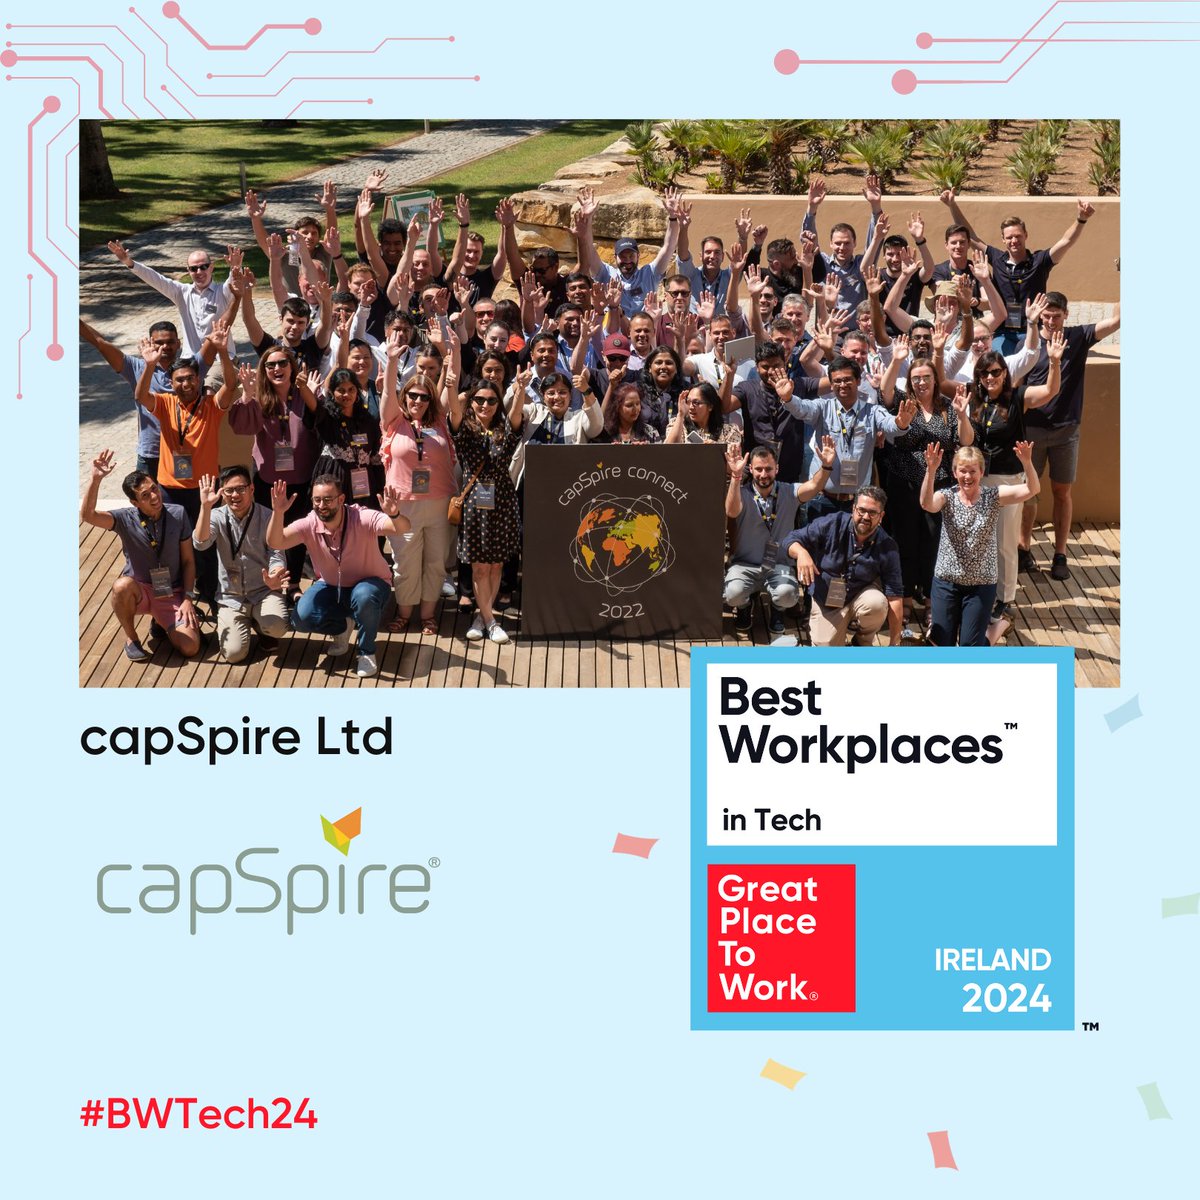 Delighted to announce that capSpire Ltd achieved the recognition of Best Workplace™ in Tech 2024! Congratulations 👏🎉 Discover the full list here 👉 hubs.li/Q02y4DVx0 #BWTech24